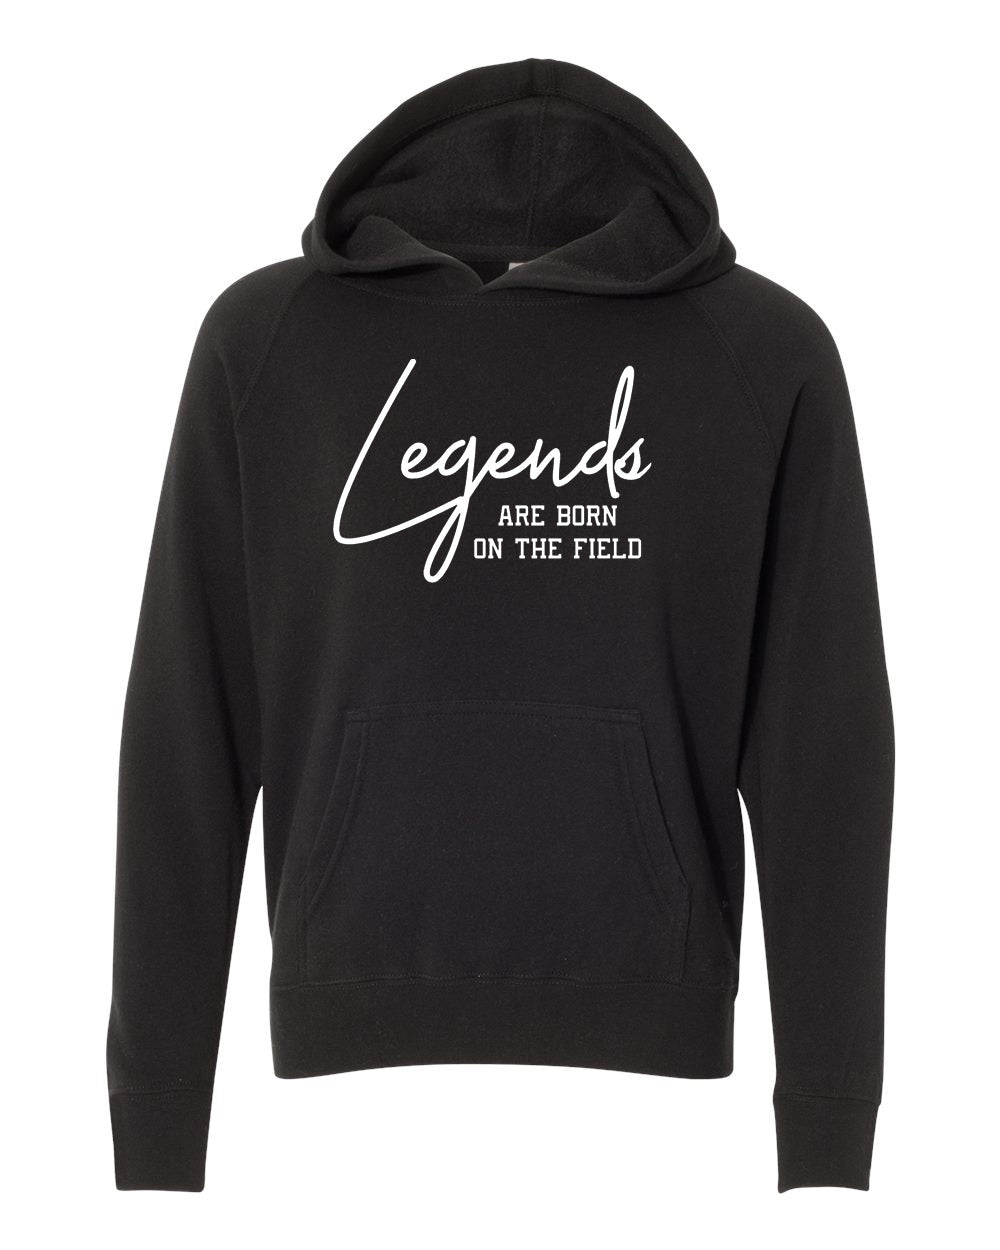 Legends Are Born On The Field Adult Hoodie